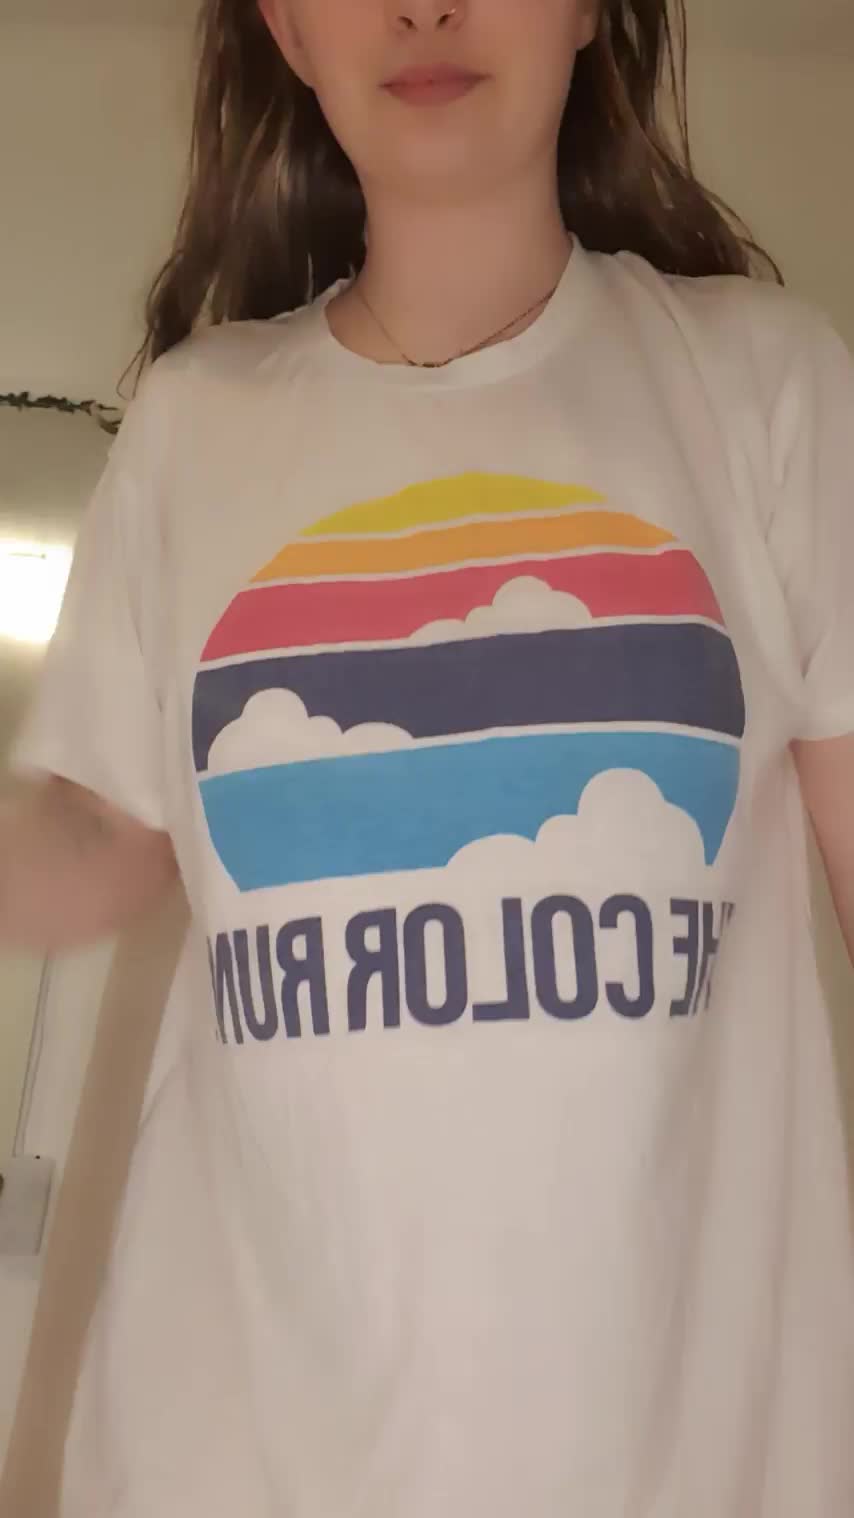 I love wearing oversized t-shirts to trick people into thinking my tits are small : video clip